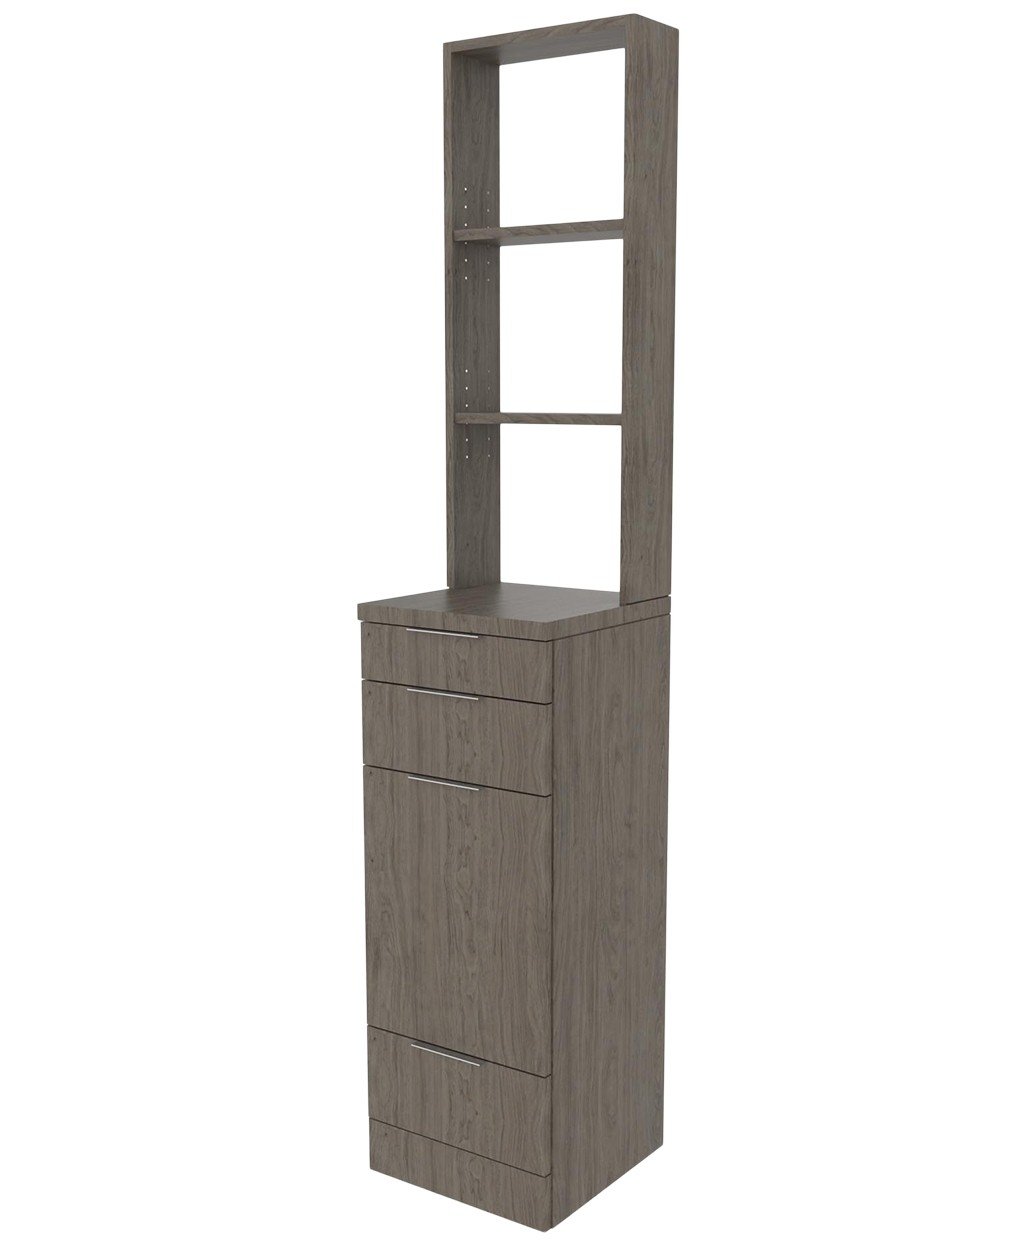 Collins E1033 Nico Styling Tower w/ Retail